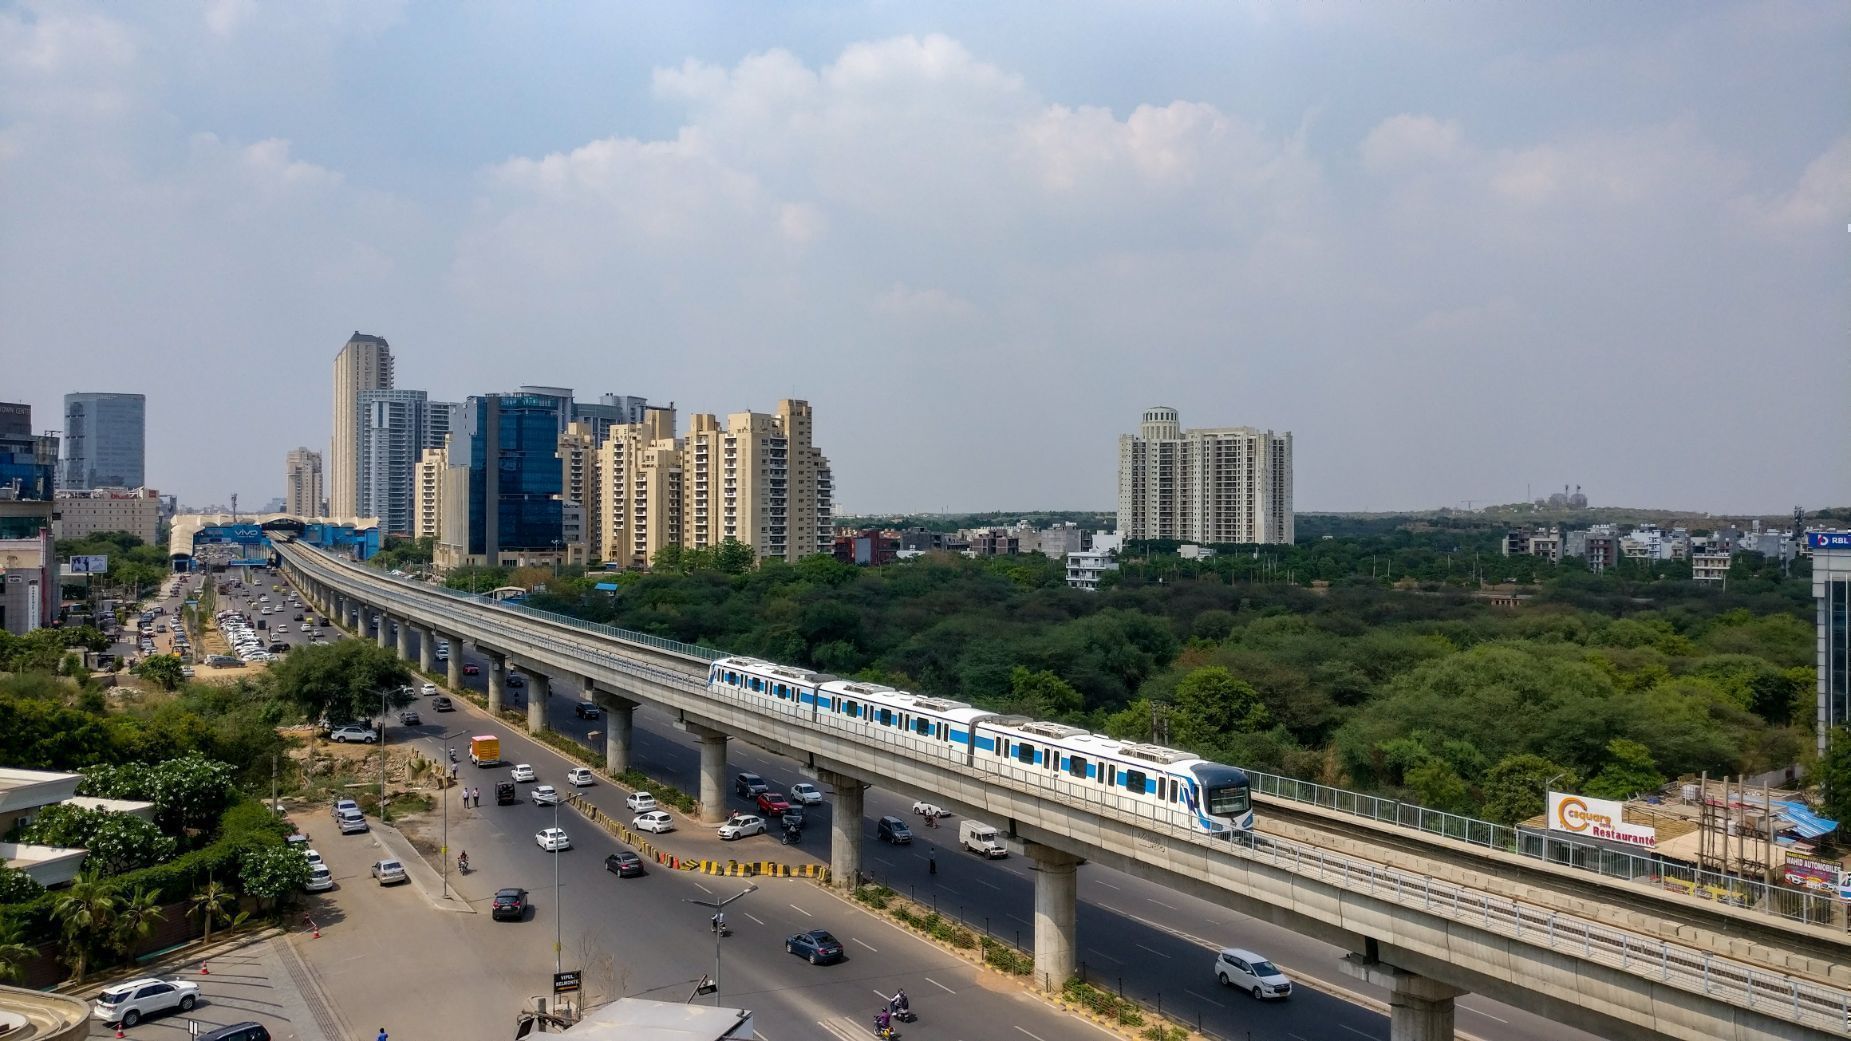 Gurgaon Metro Stations - Facts, Route, Nearby Landmarks & More